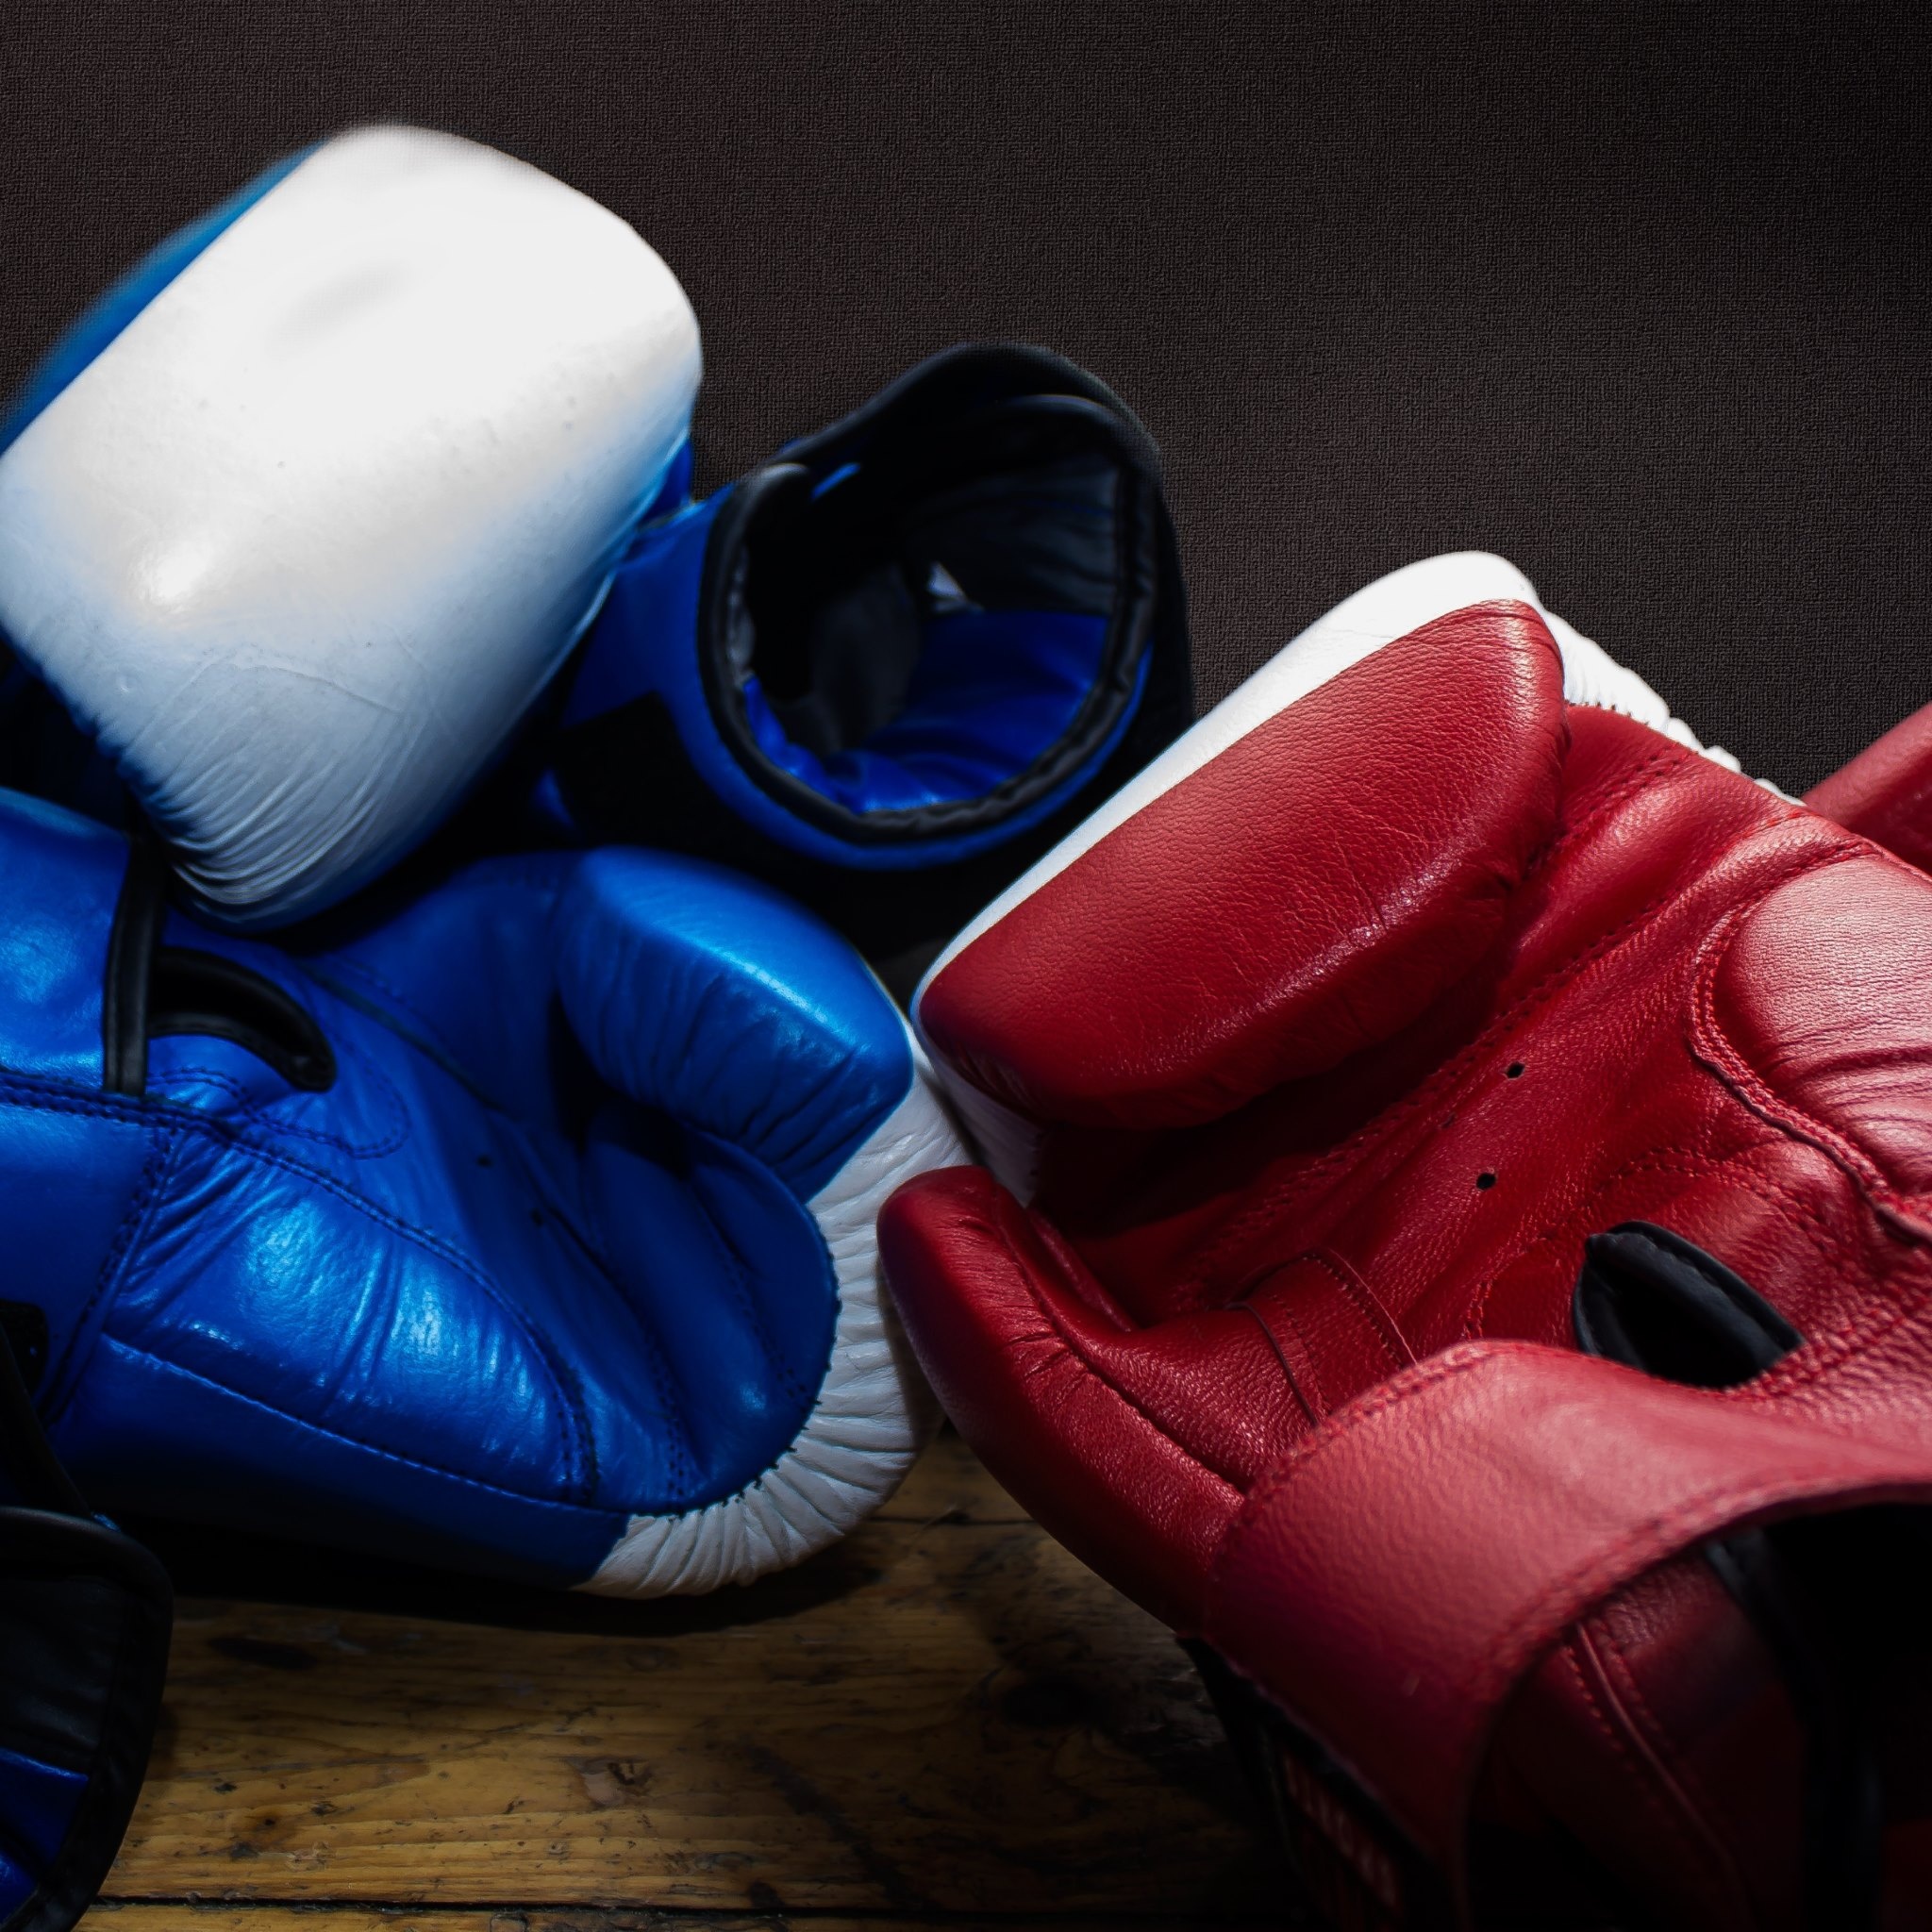 Boxing gloves, Sports equipment, Training gear, Fitness accessories, 2050x2050 HD Handy